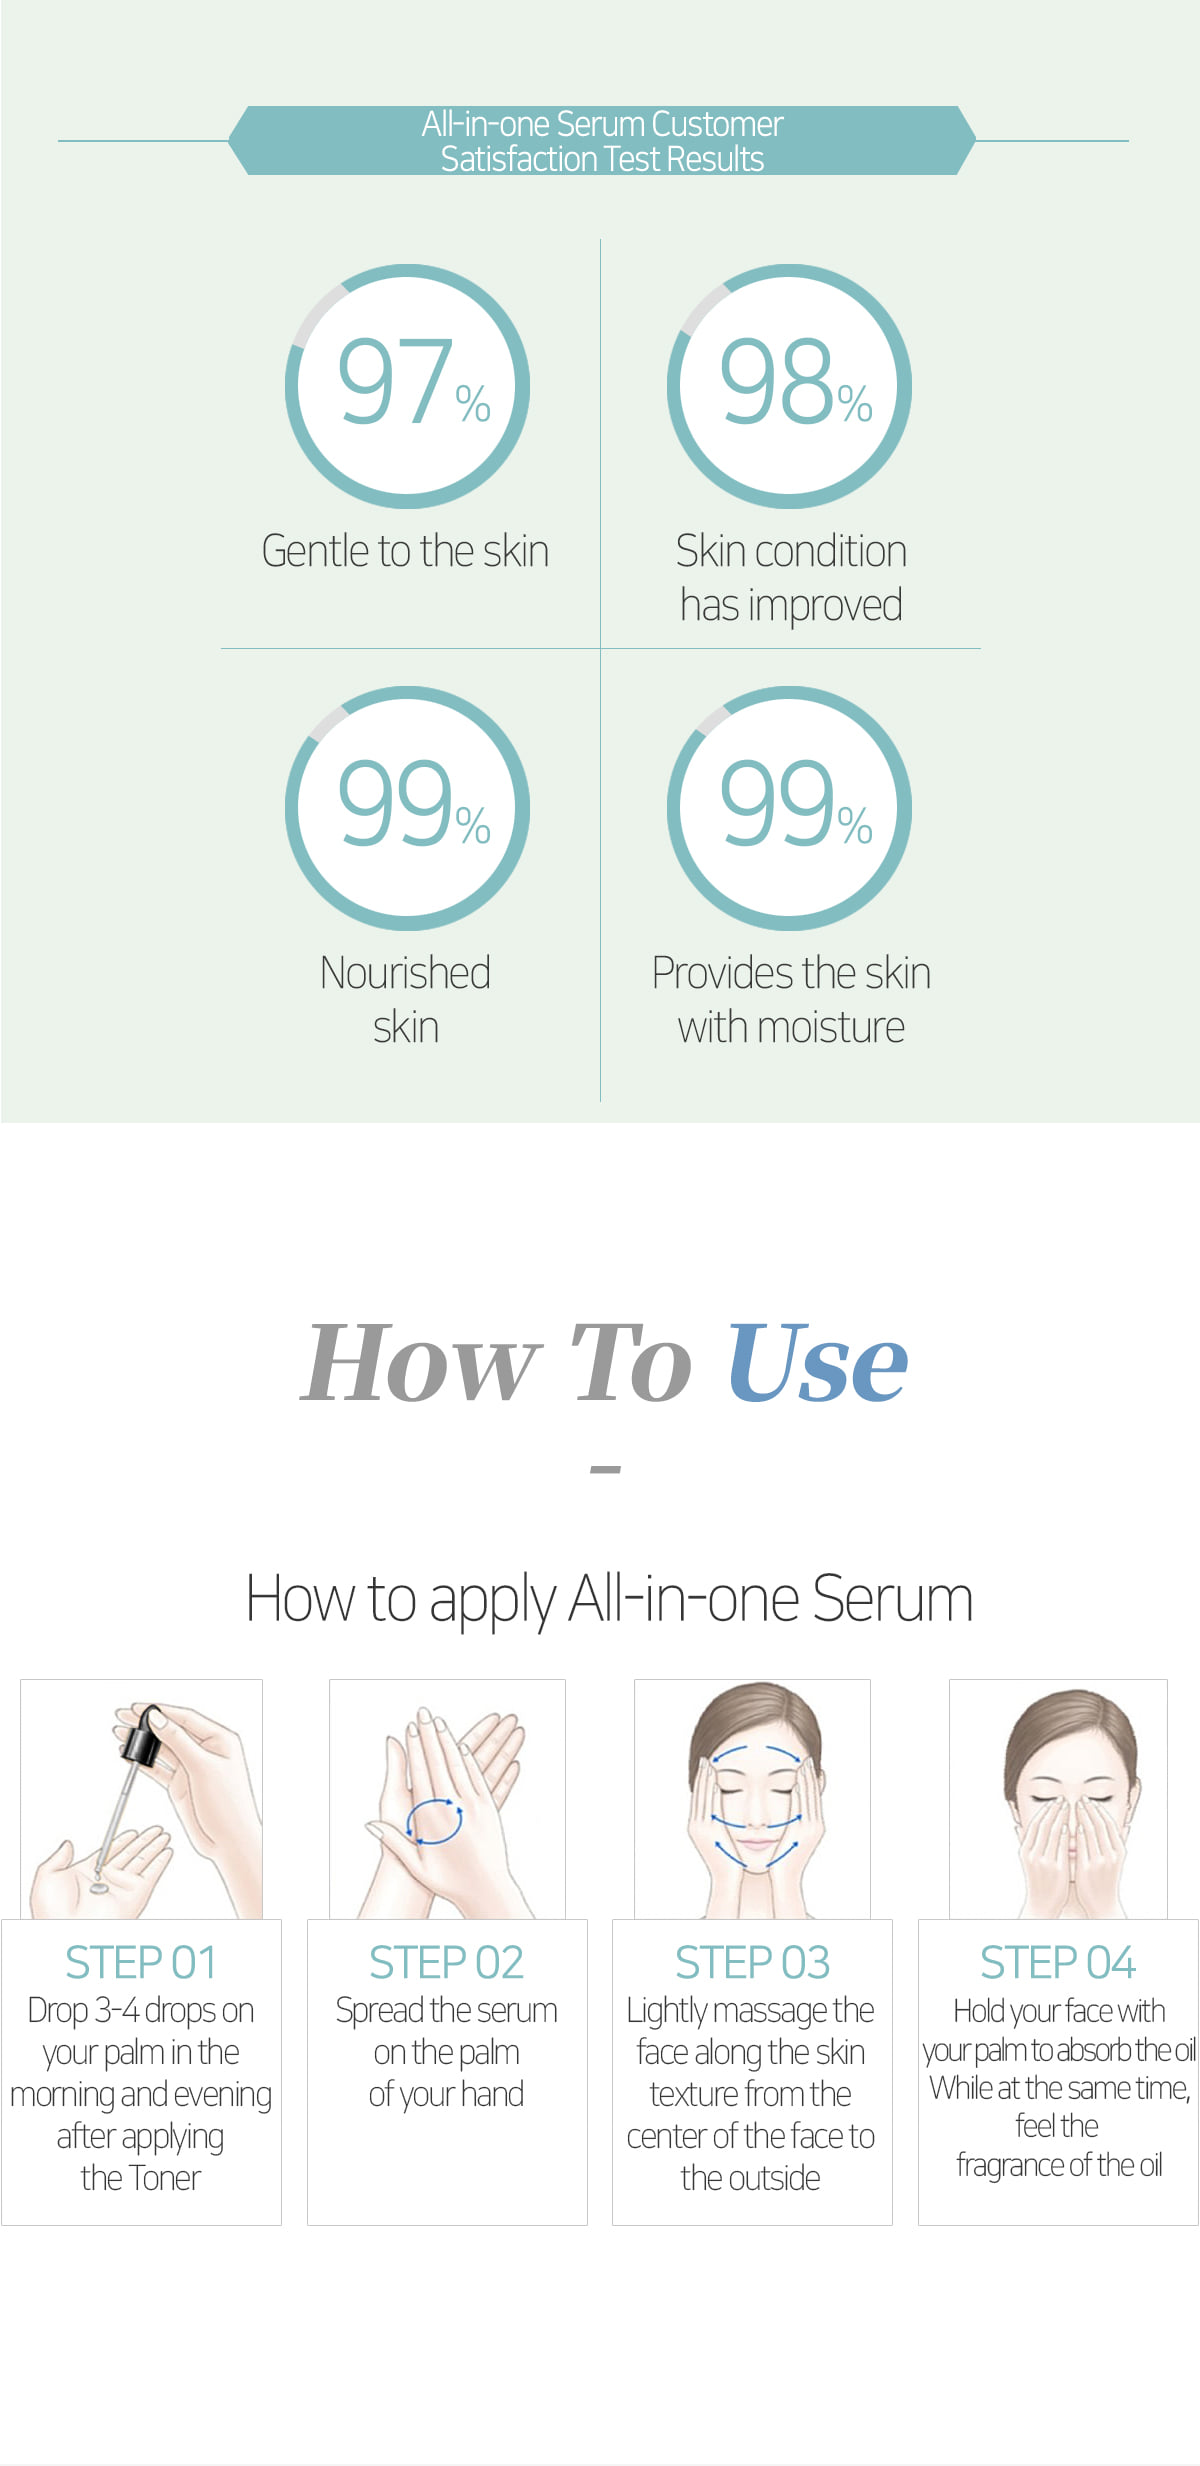 Dr.hunacell - Micron serum all in one (50ml) X 100EA FOR B2B Skin care  Moisturizing  Serum  hunacell  All-in-one  All-In-One Serum  essence  Whitening Serum  Whitening effect